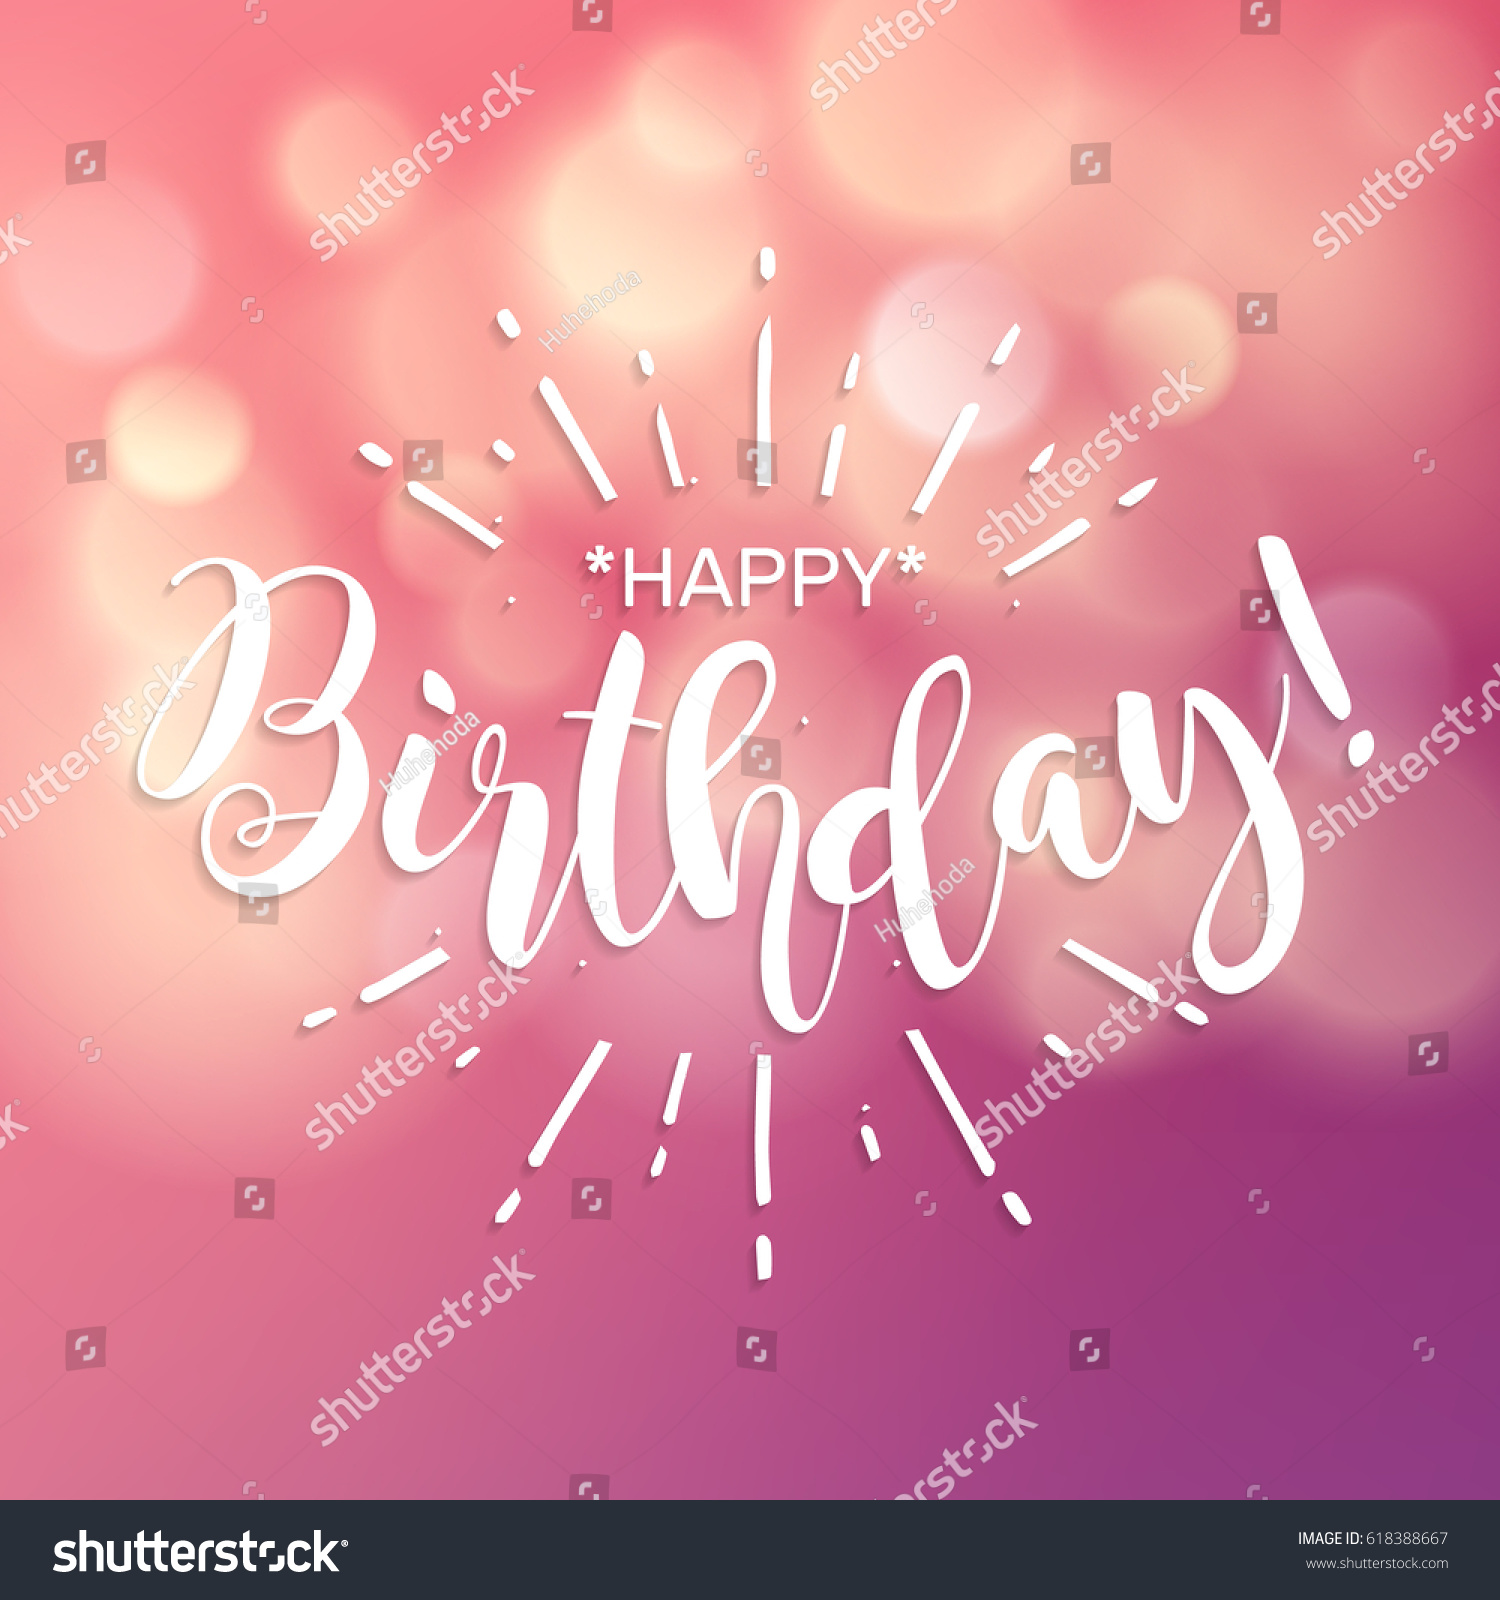 Happy Birthday Beautiful Greeting Card Poster Stock Vector (Royalty ...